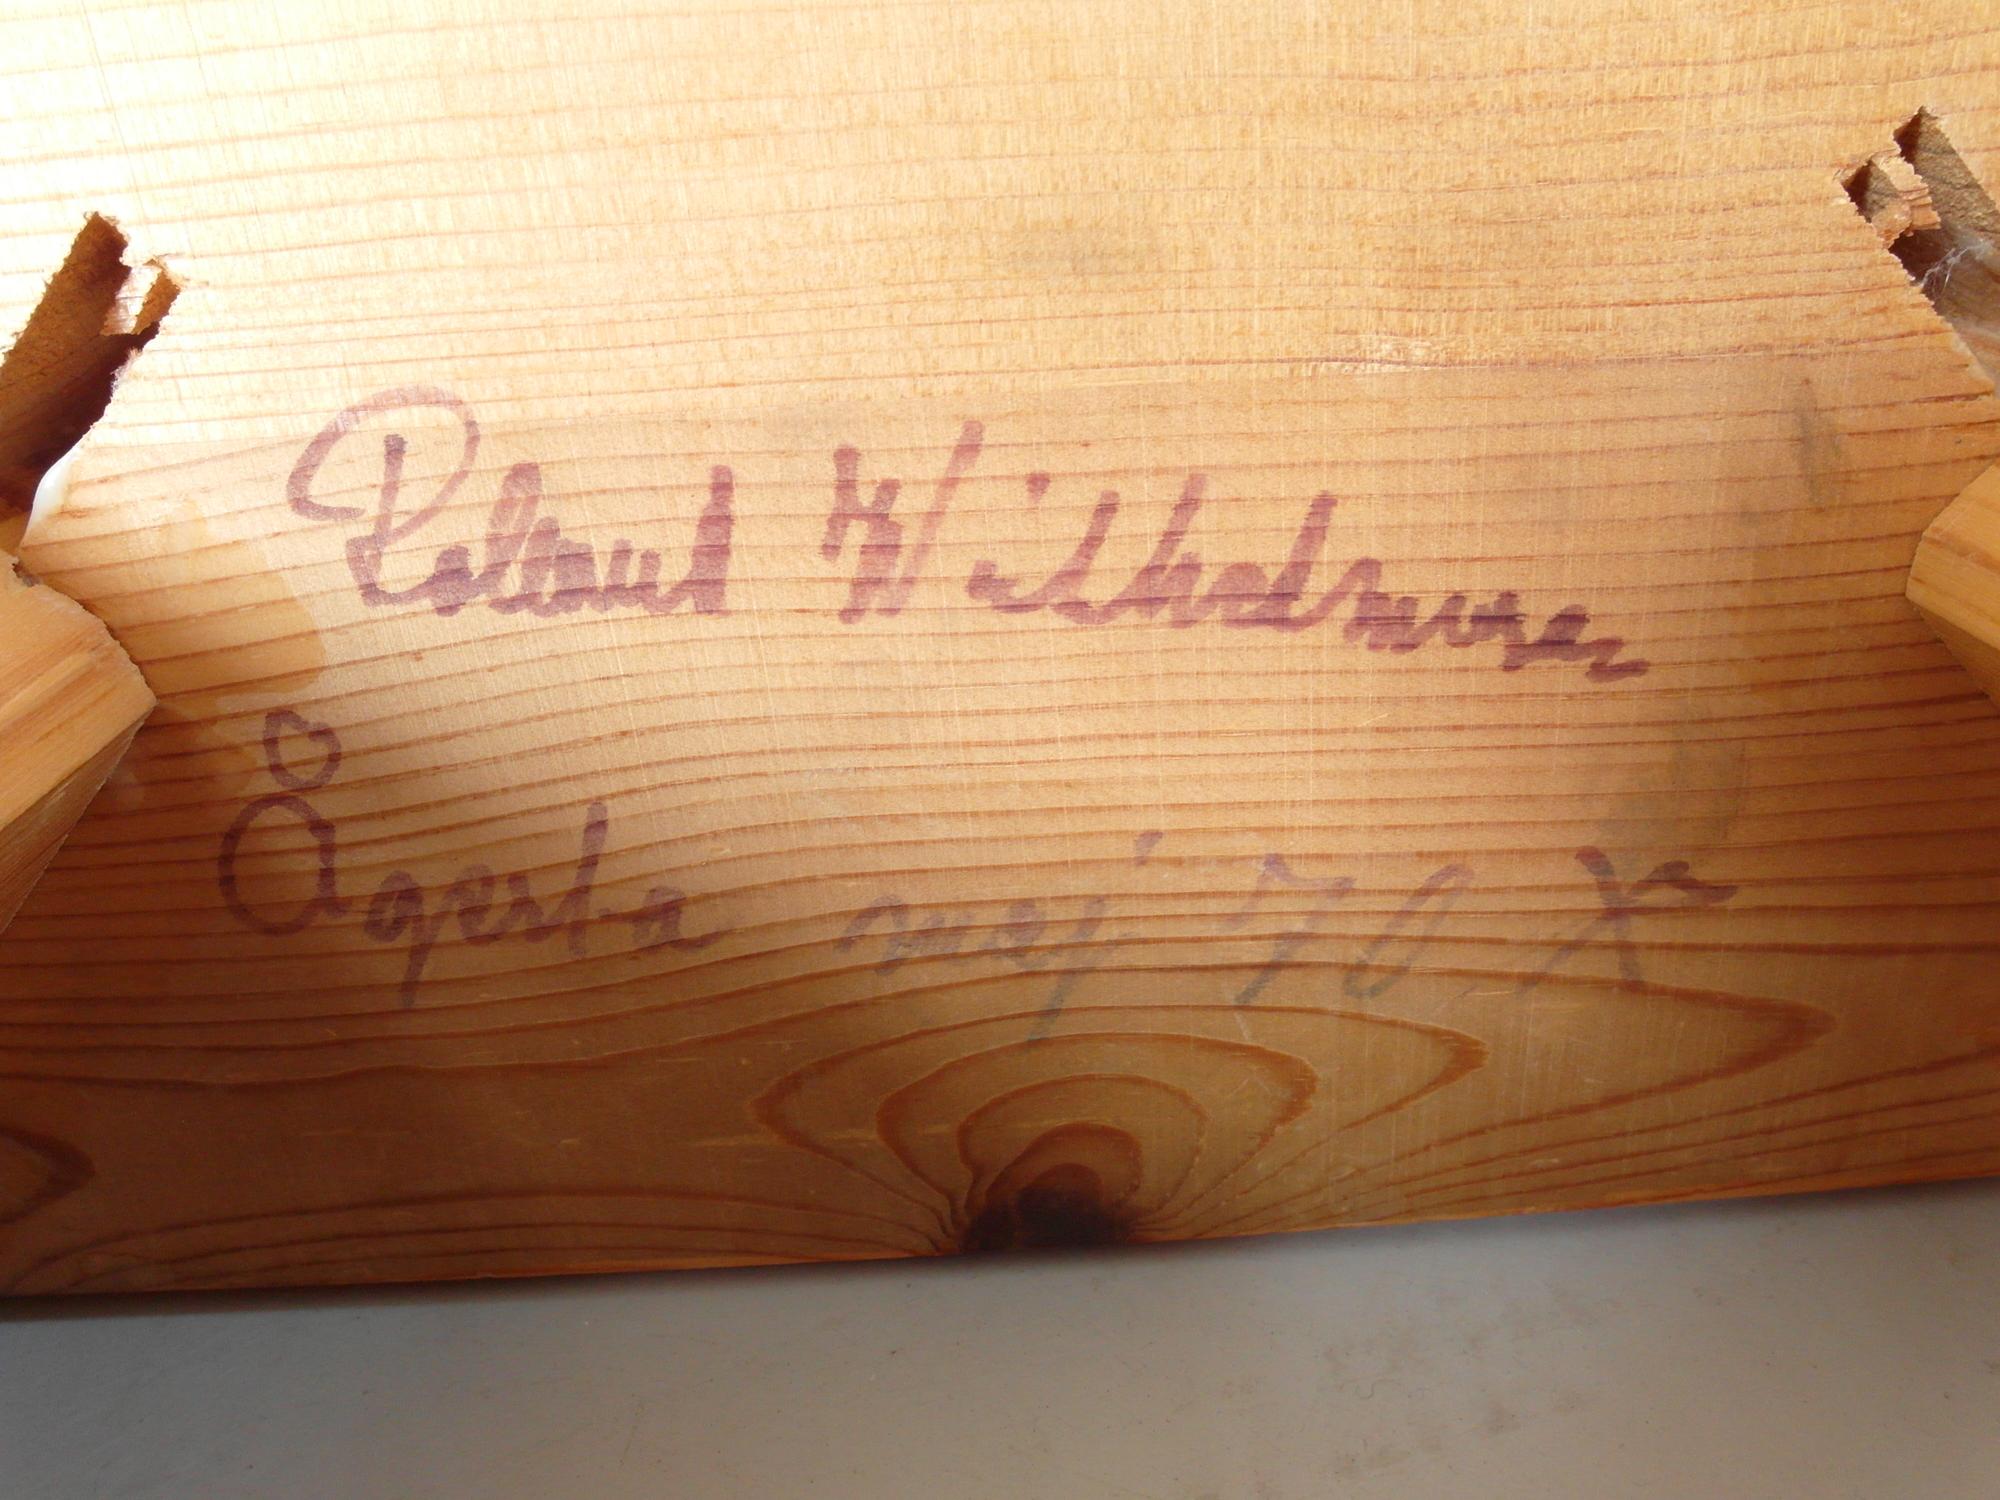 Roland Wilhelmsson, Unique Pair of Signed Stools, Studio of Artist 1965 and 1970 For Sale 7